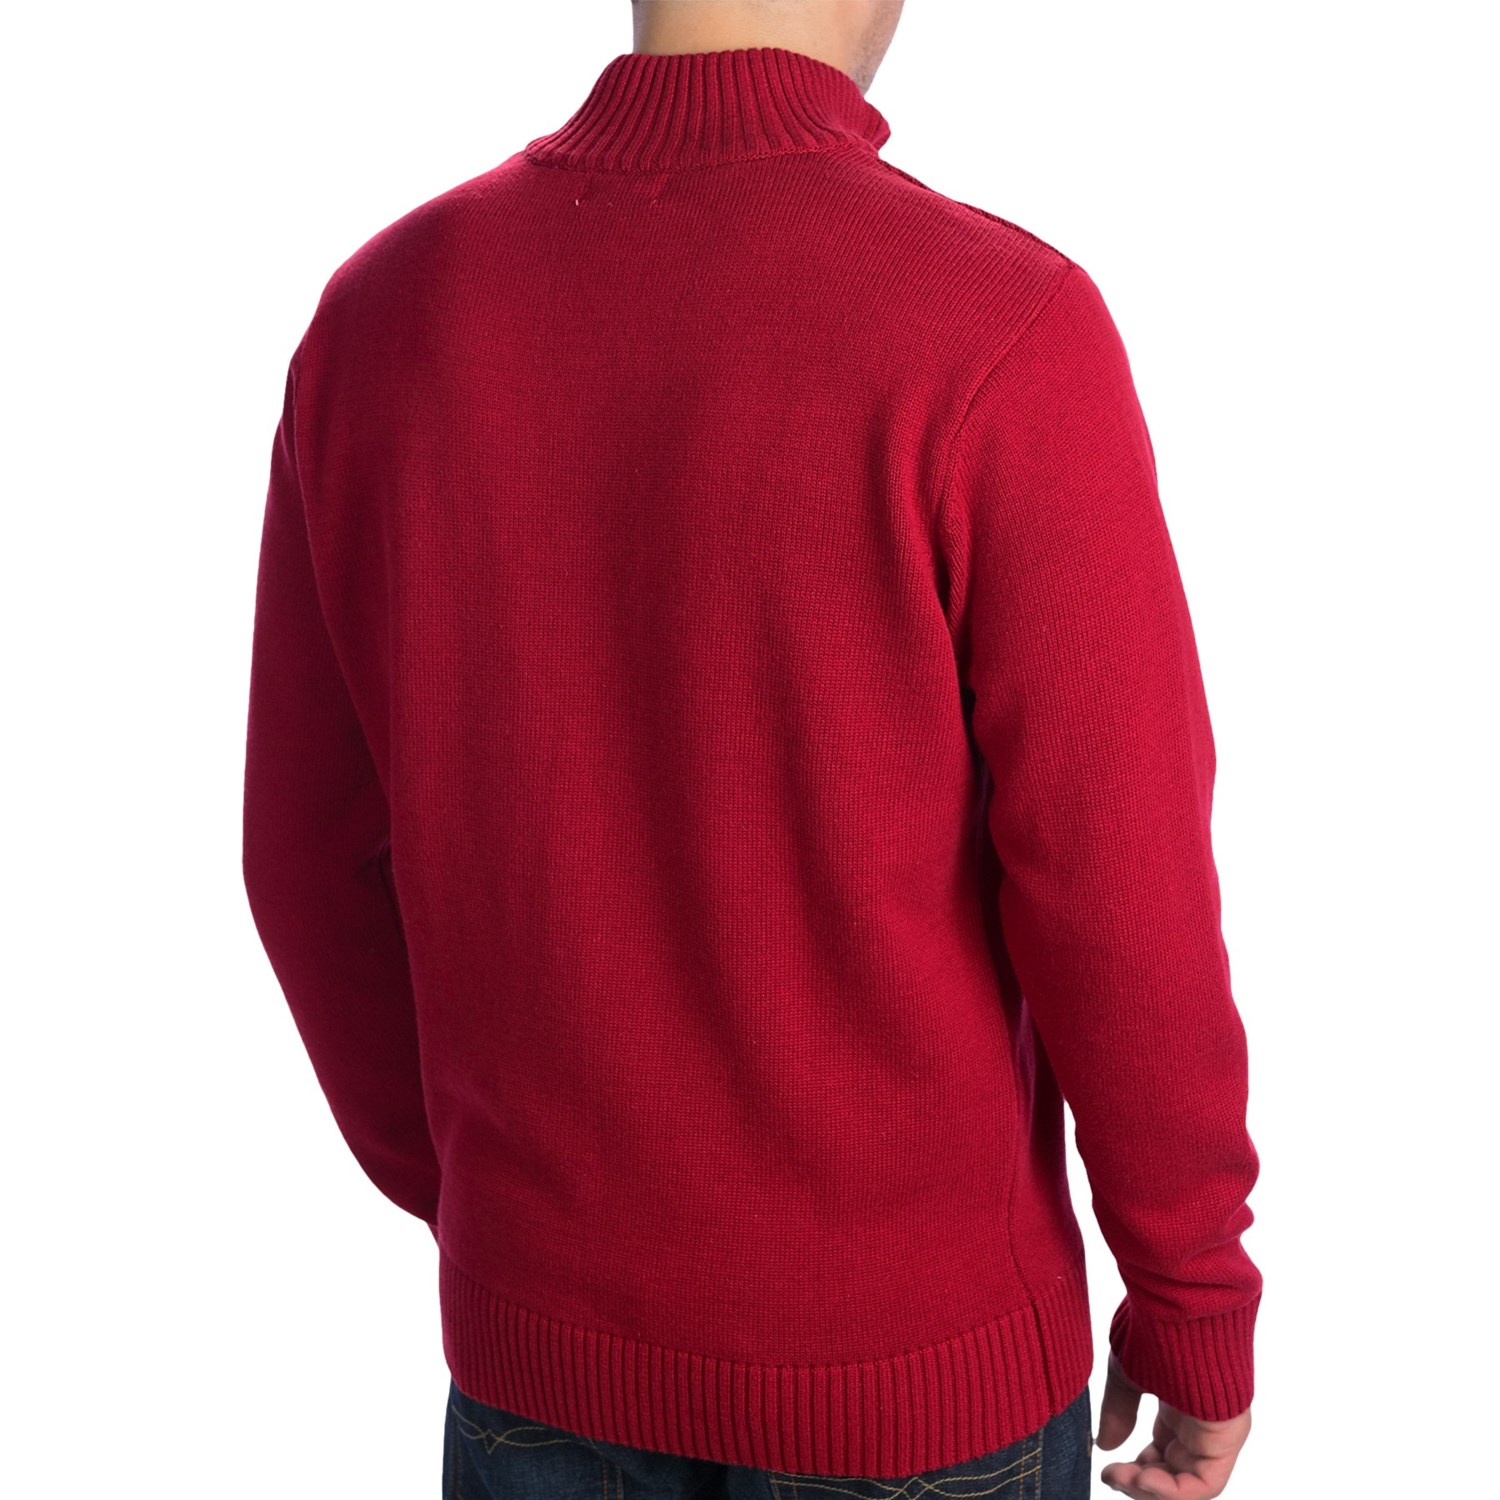 Dockers Cotton Sweater (For Men) 8283C - Save 58%